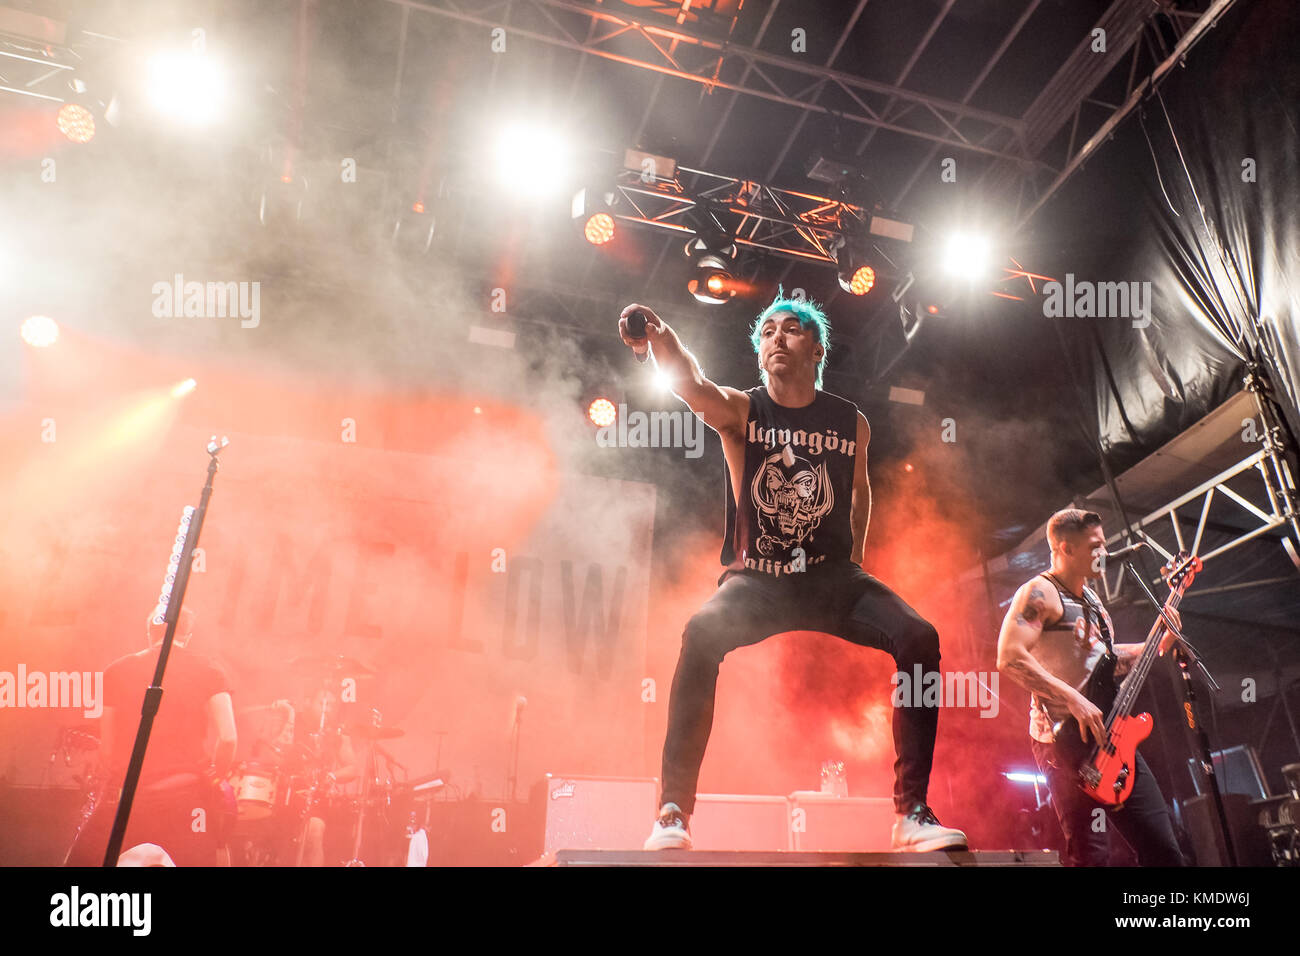 The American pop punk band All Time Low performs a live concert during the  Swiss music festival Greenfield Festival 2015 in Interlaken. Here vocalist  and guitarist Alex Gaskarth is seen live on